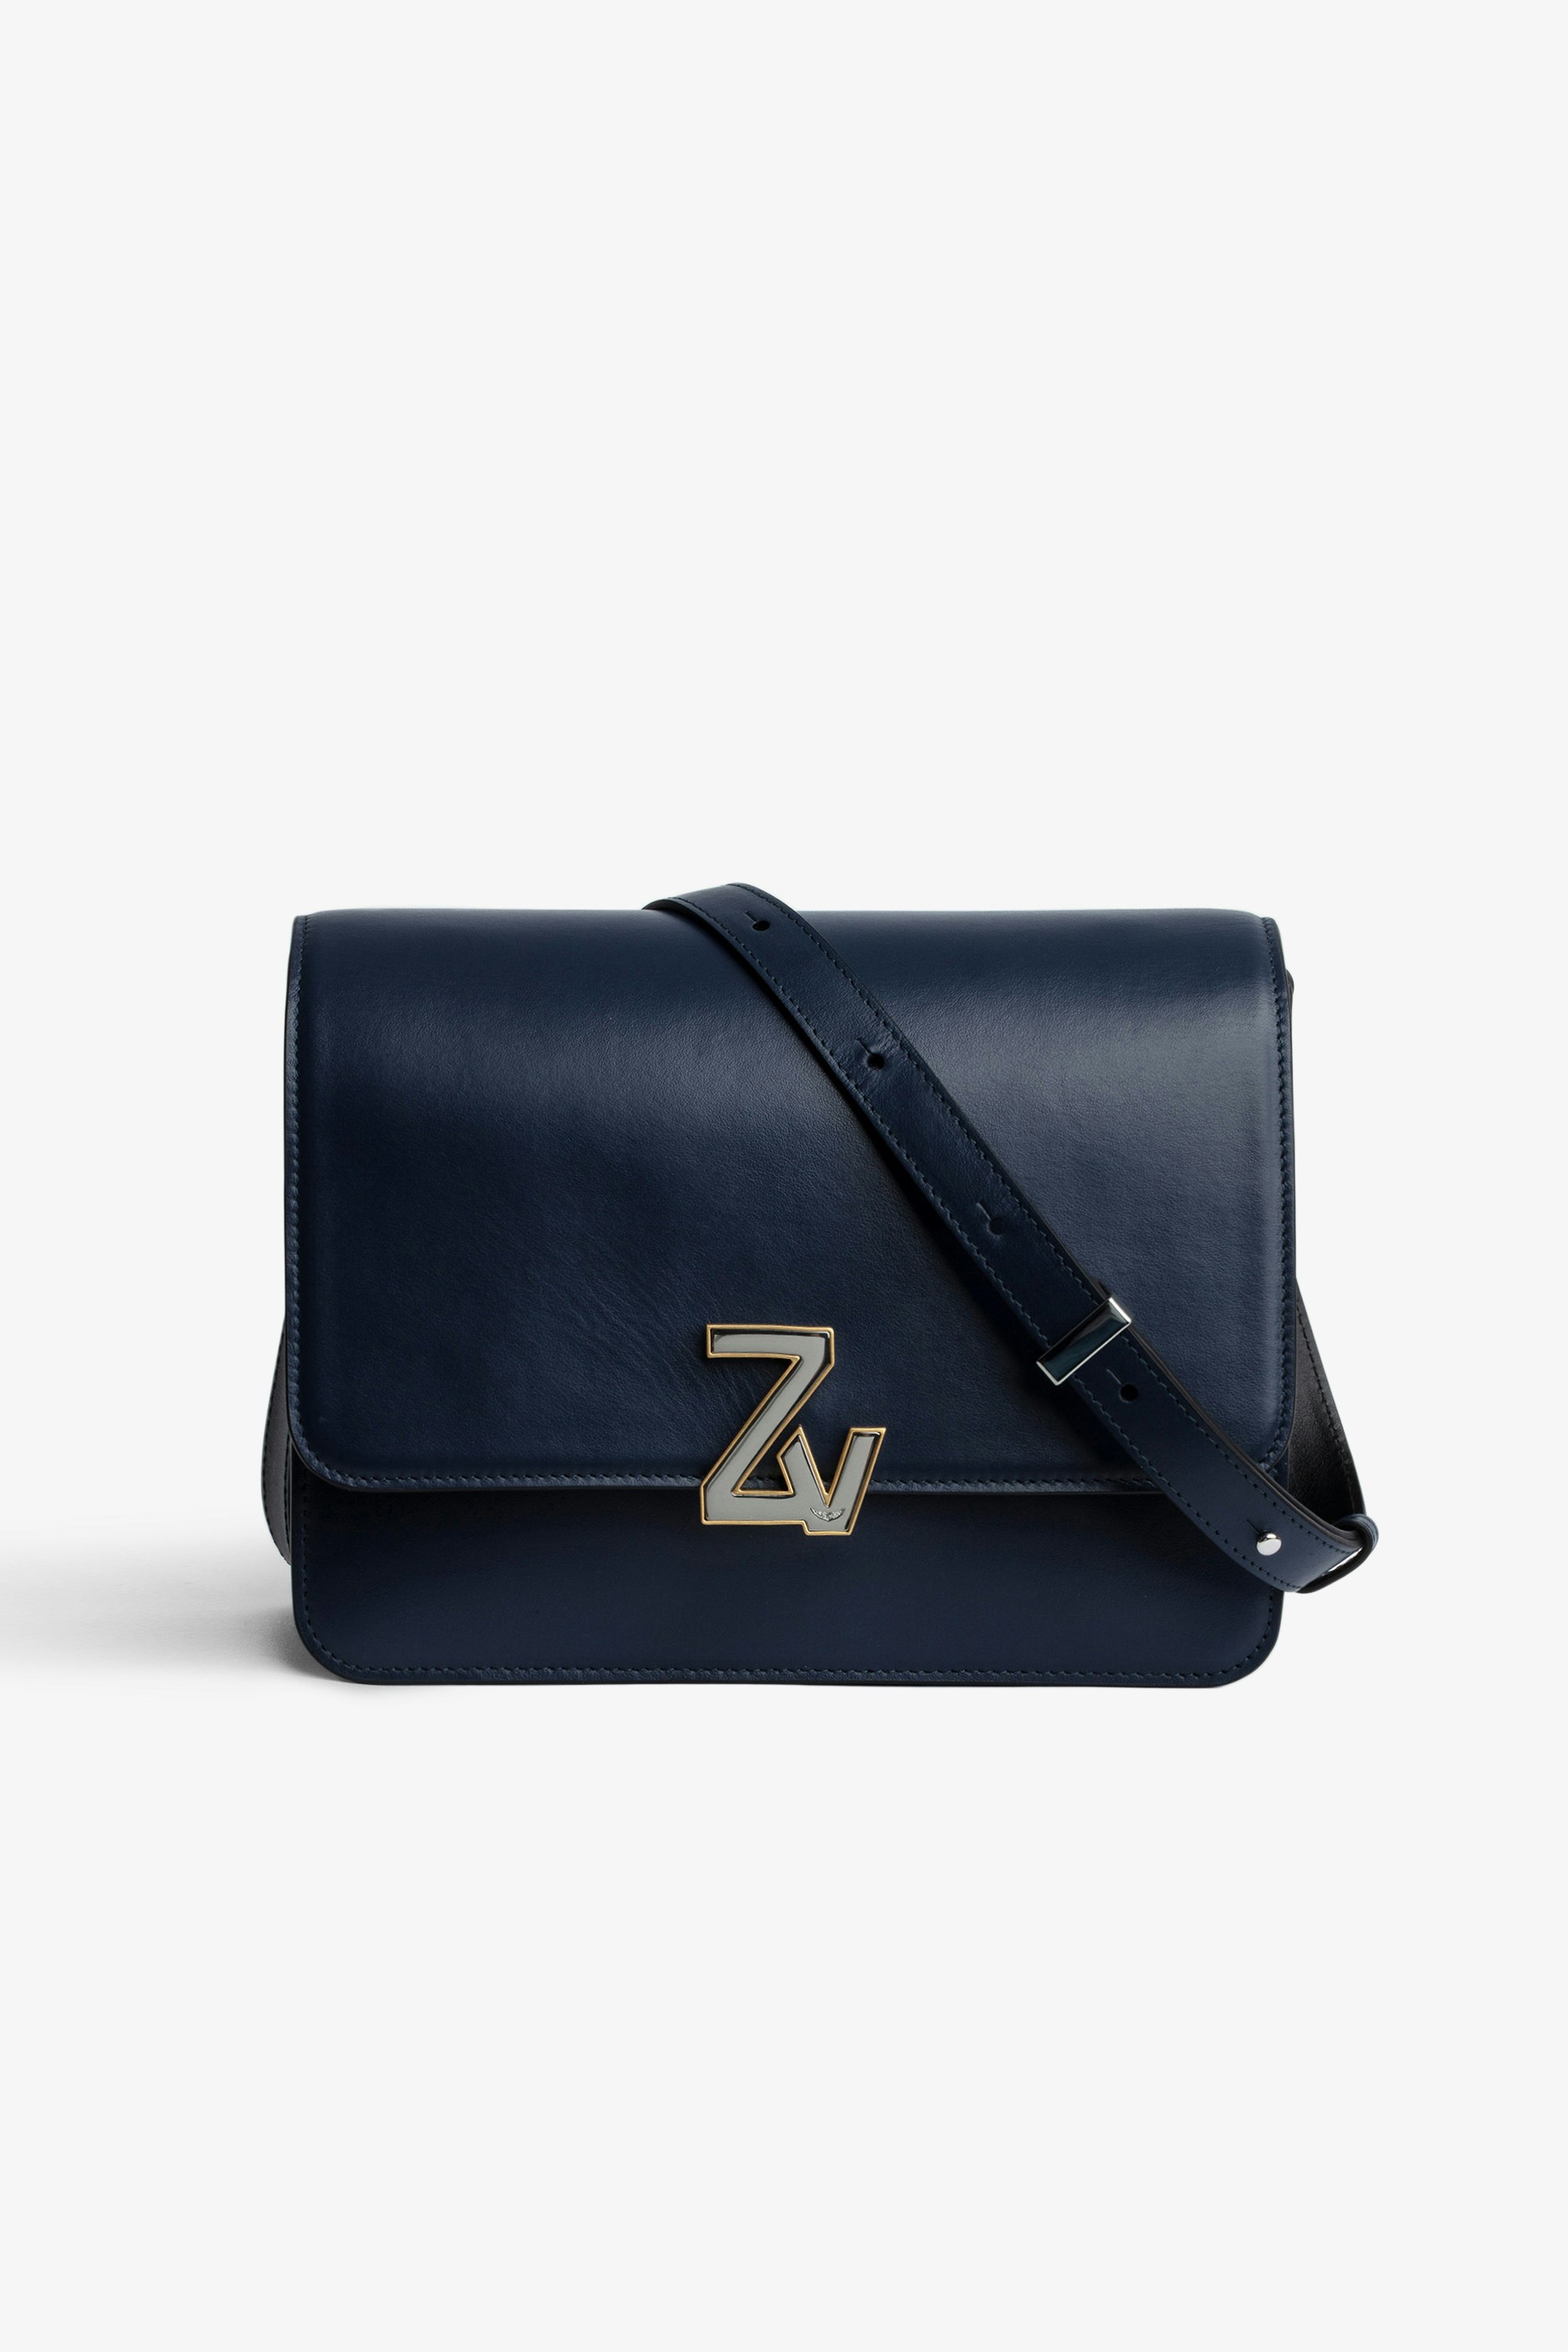 ZV Initiale Le City バッグ Women’s ZV Initiale Le City bag in navy blue smooth leather